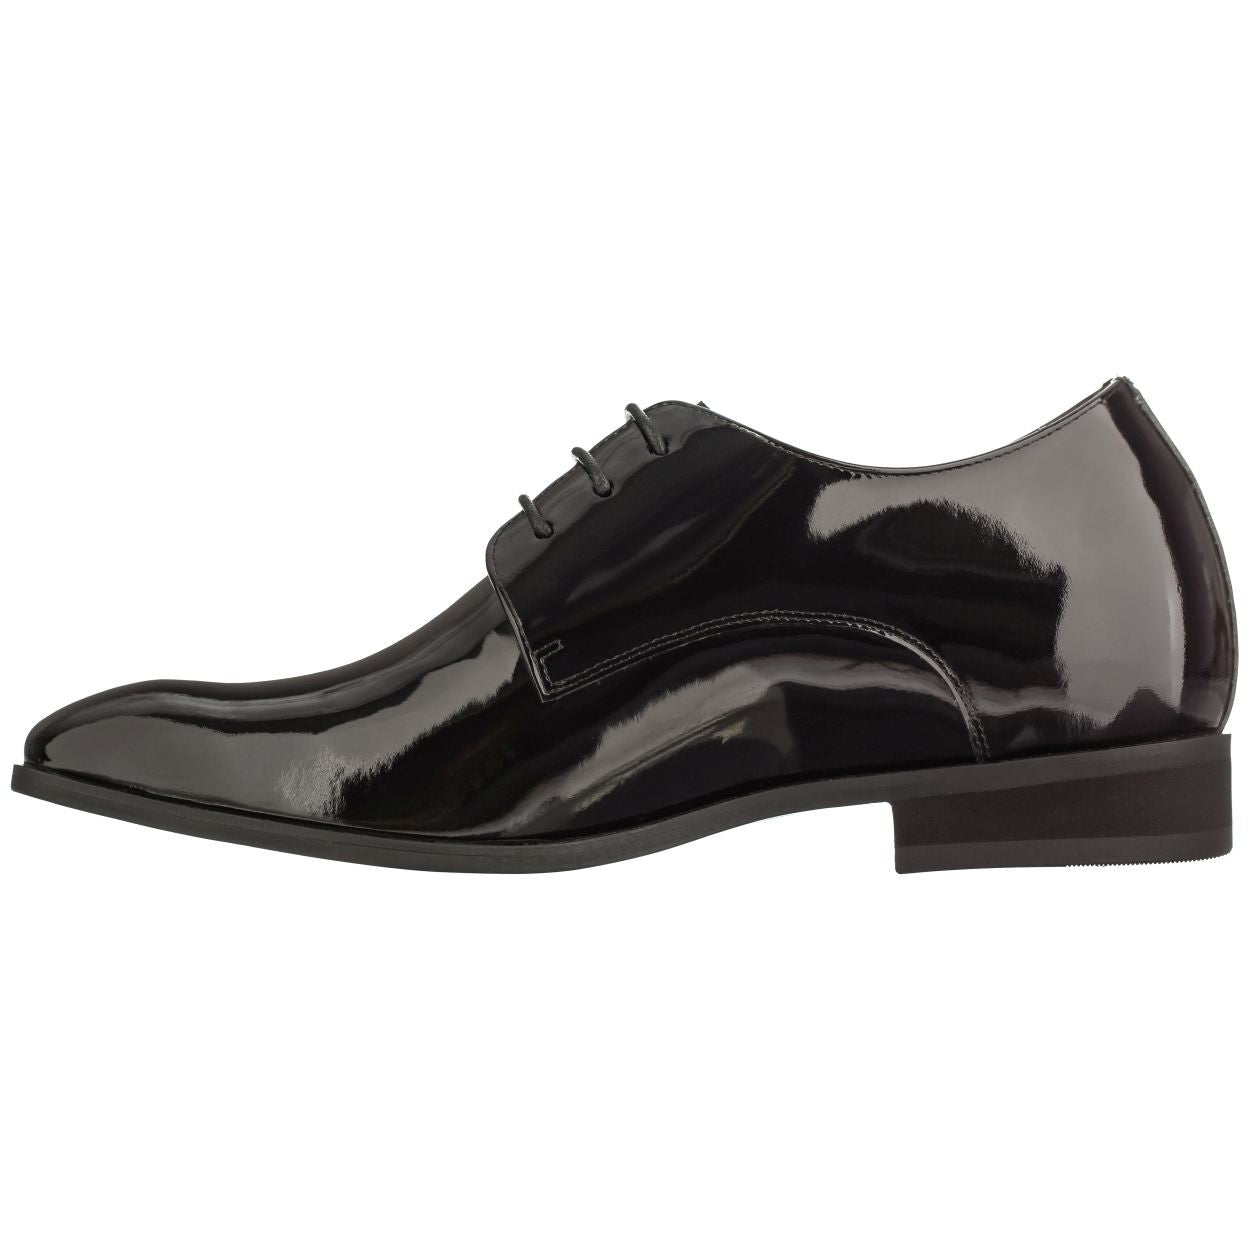 Elevator shoes height increase TOTO Formal Patent Leather Dress Shoes - Three Inches - D16026